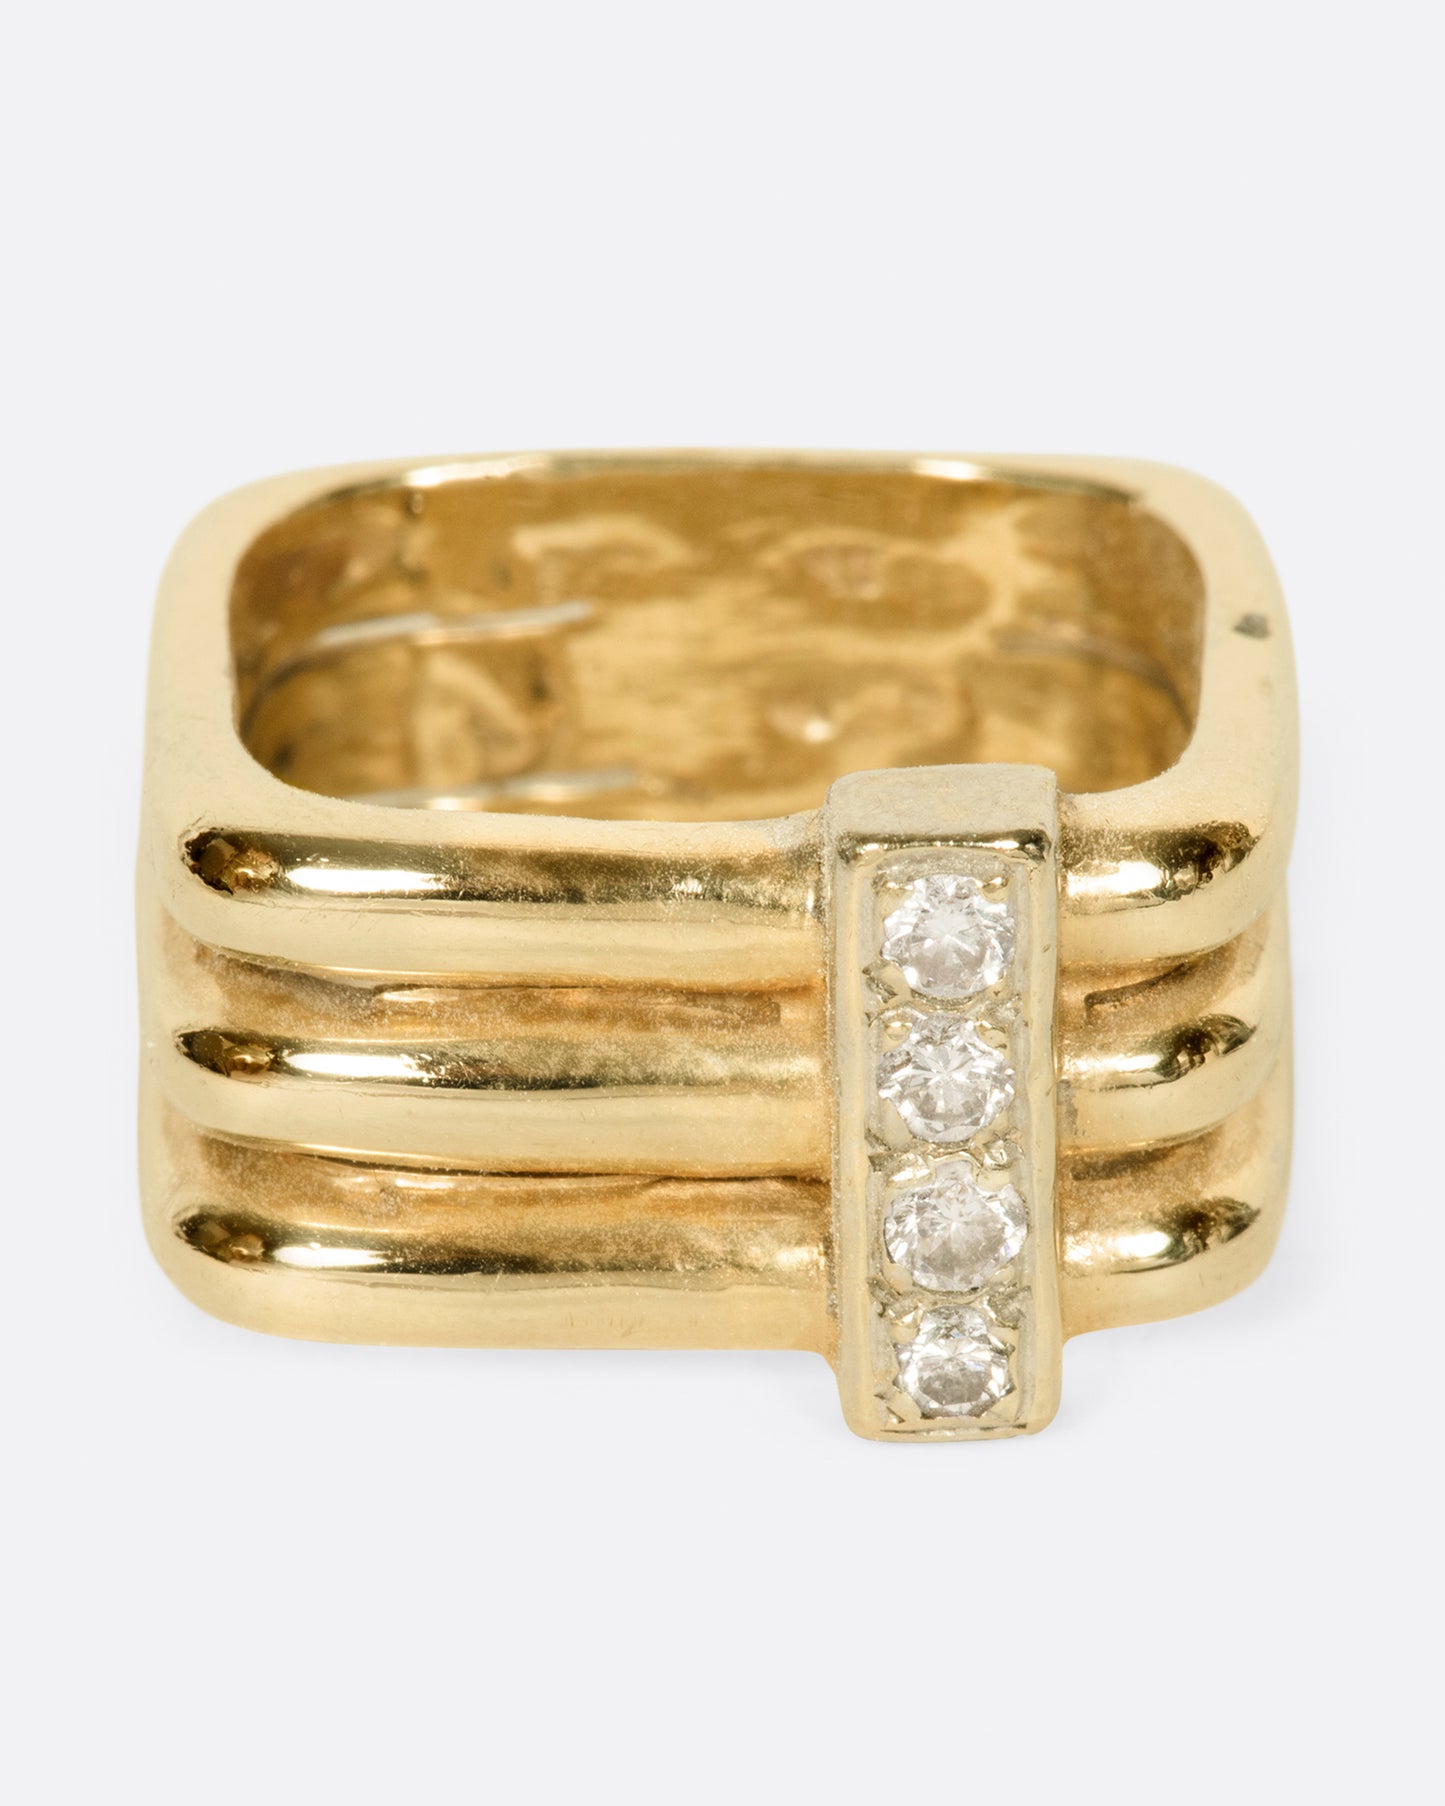 A single band that gives the illusion of a stack, connected with diamonds, shown from the front.